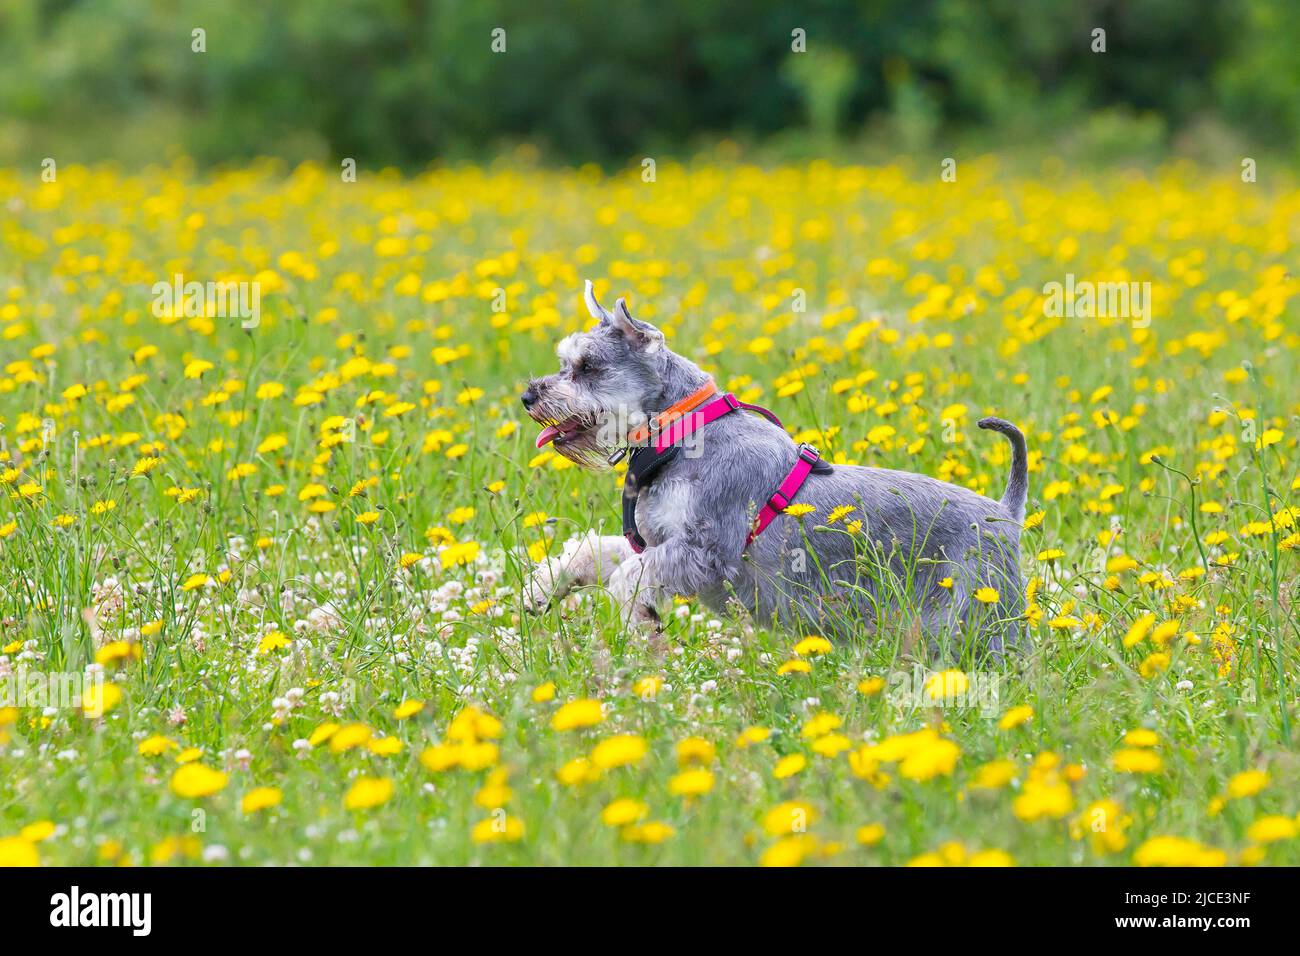 Kidderminster, UK. 12th June. 2022. UK weather: with lovely, warm temperatures and sunny conditions, today is a perfect day to play in the park. This happy pet Schnauzer dog is running through the dandelions in a country park field. Credit: Lee Hudson/Alamy Live News Stock Photo